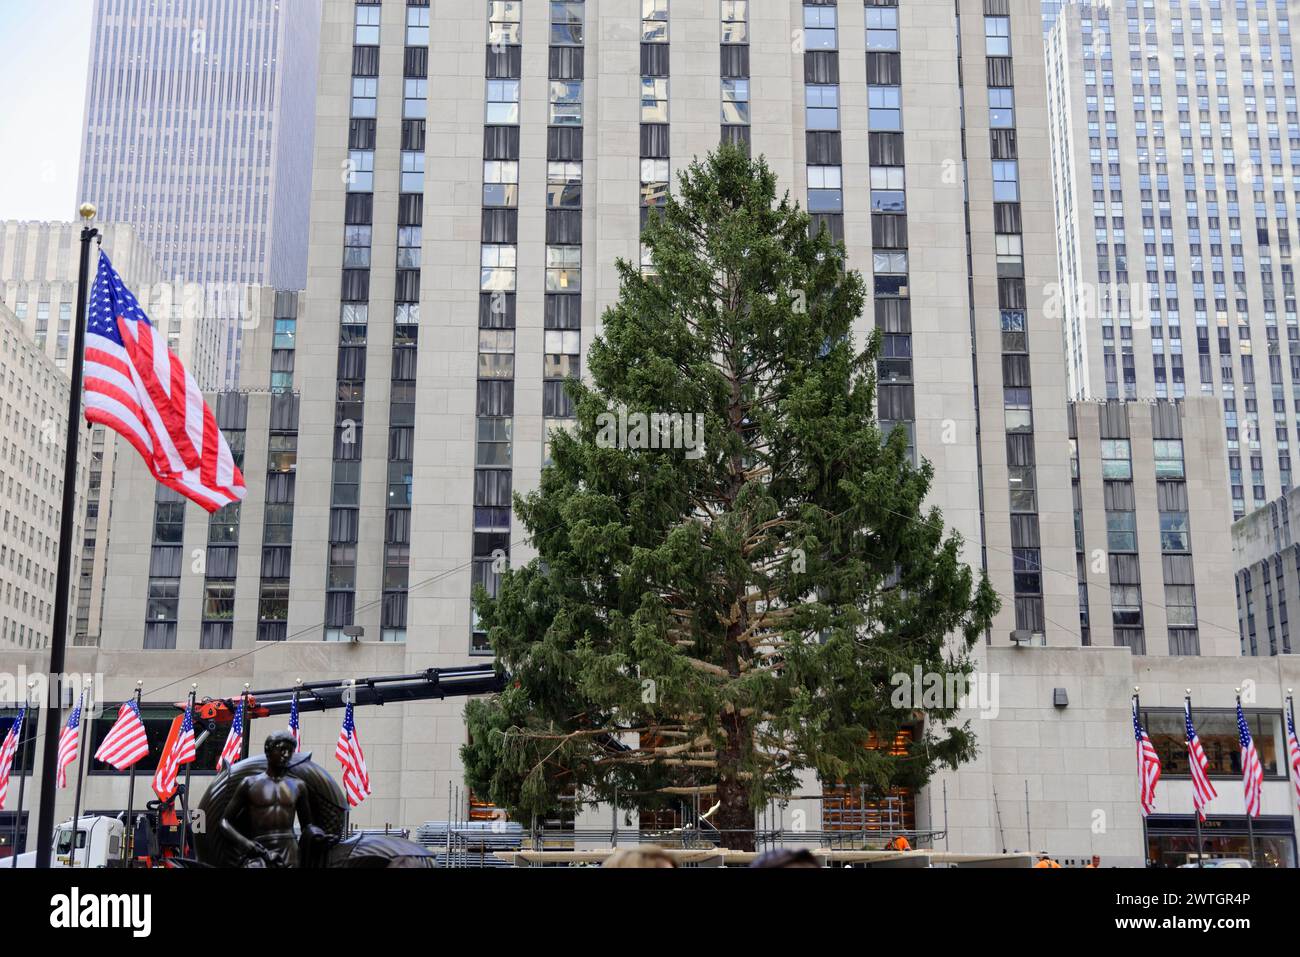 Rockfeller Centre, installation of a large Christmas tree in front of a municipal building with US flag, Manhattan, New York City, New York, USA Stock Photo